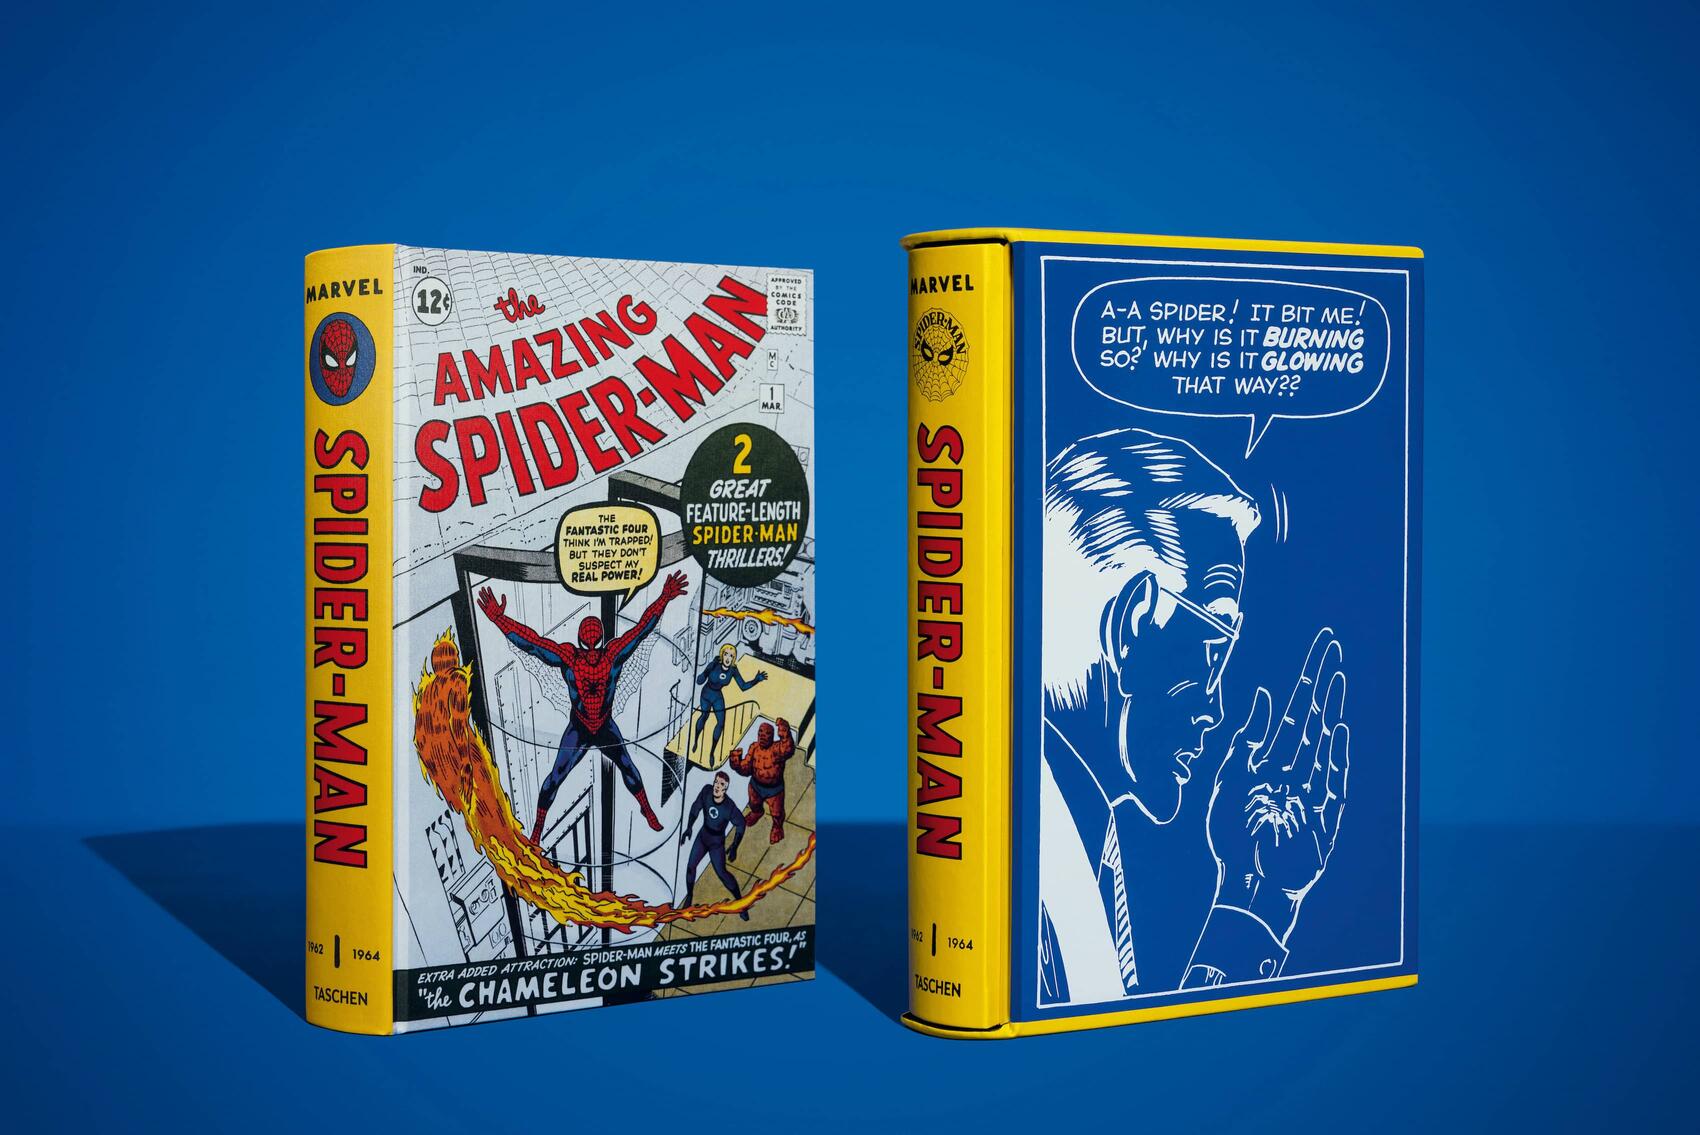 Marvel and TASCHEN team up for 'The Marvel Comics Library' series